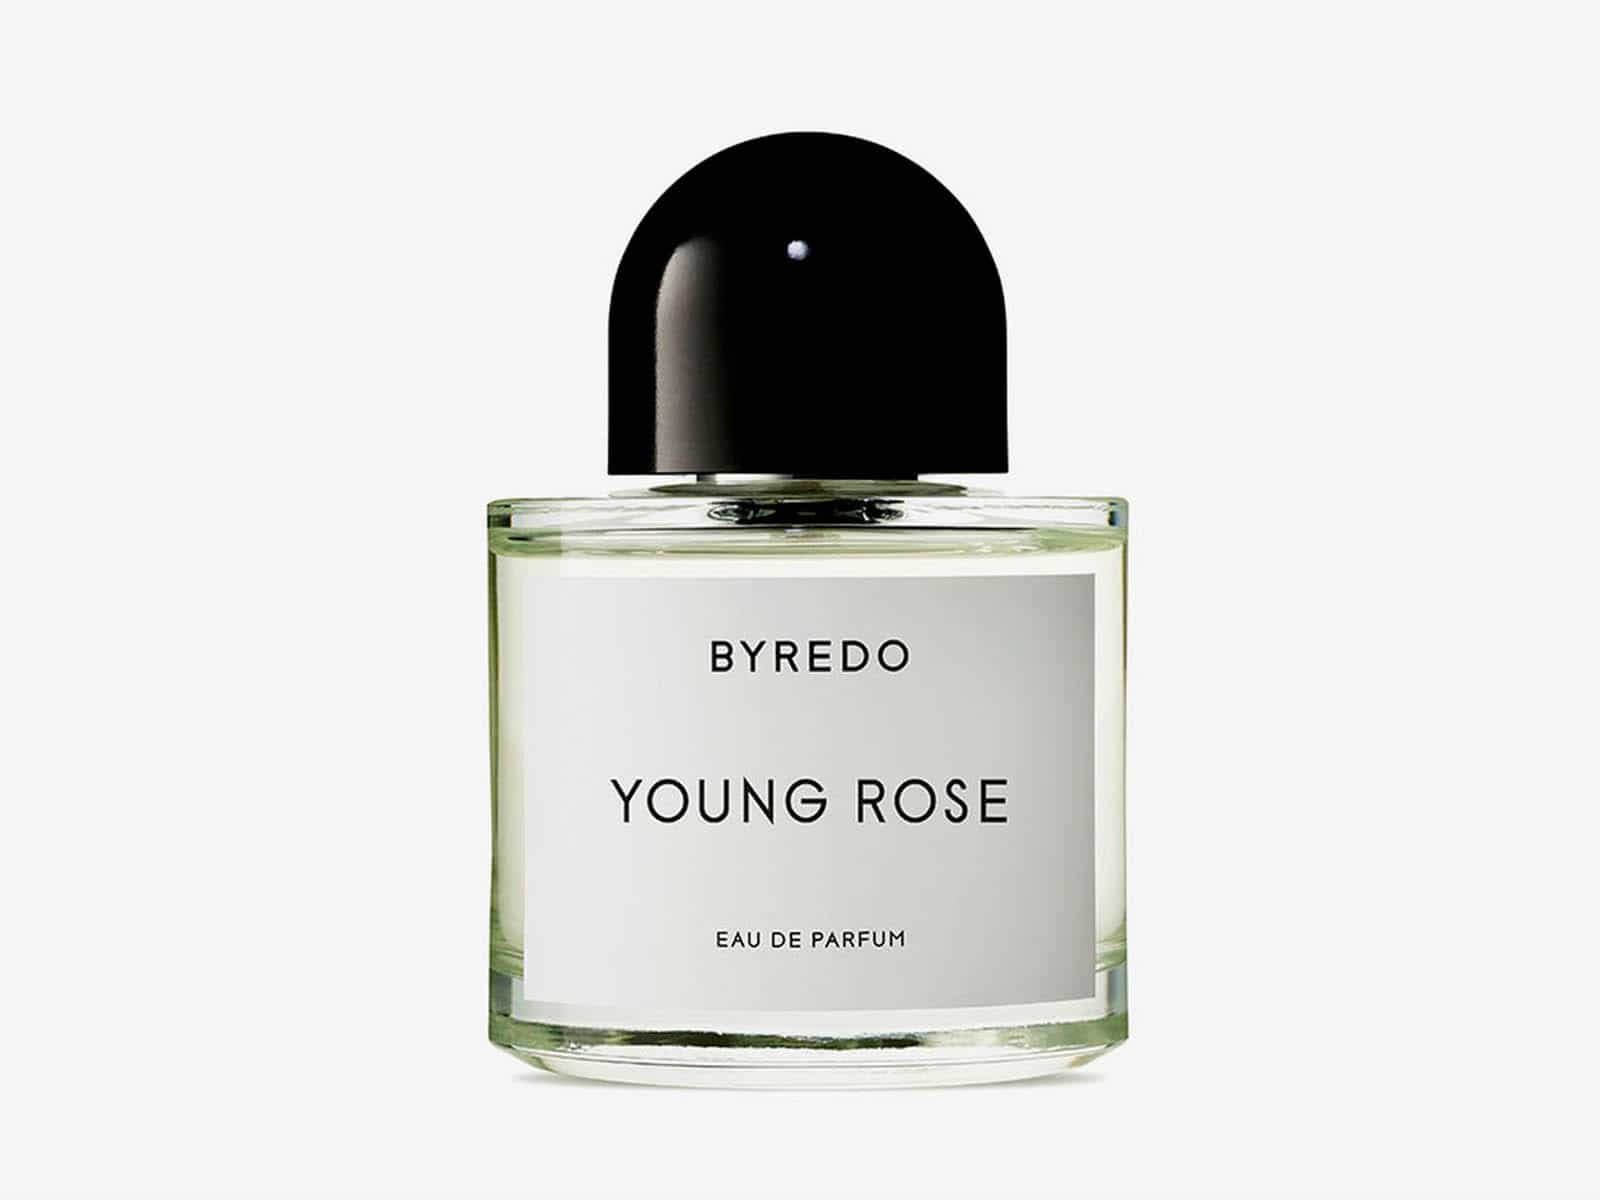 Latest acquisition: L’Oreal buys Byredo?